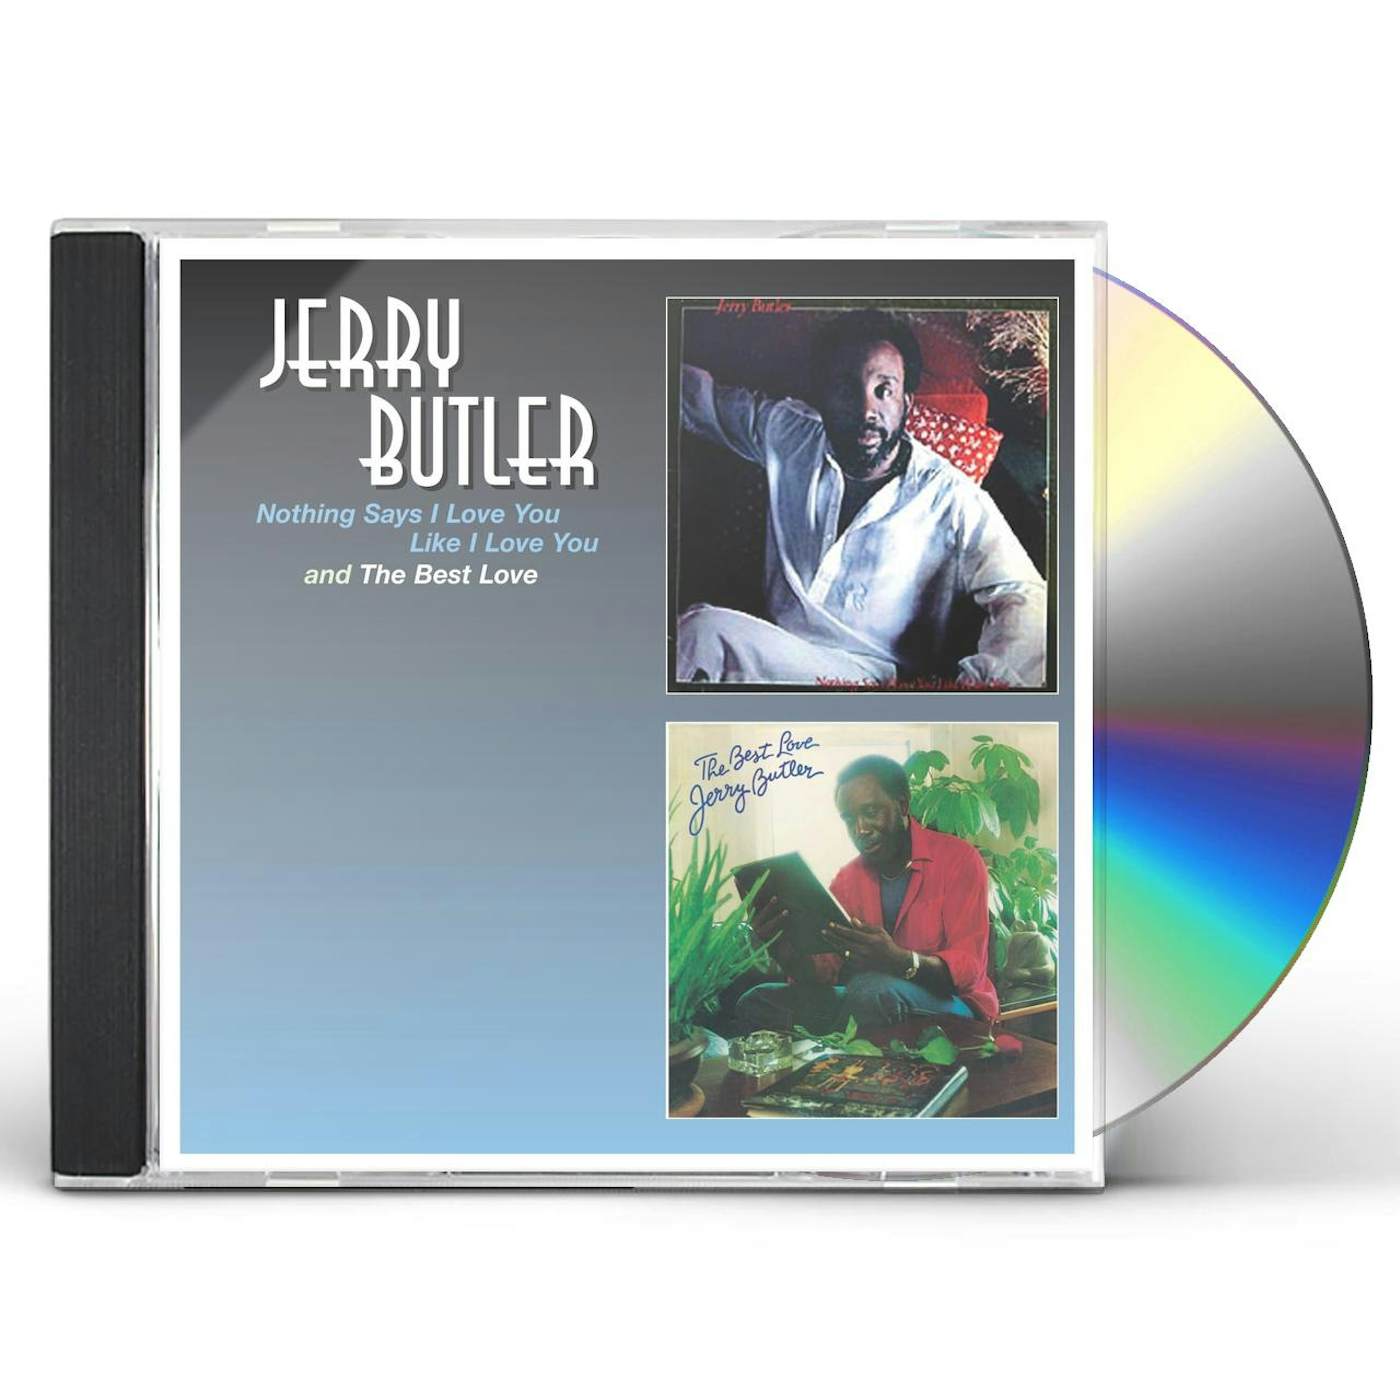 Jerry Butler NOTHING SAYS I LOVE YOU LIKE LOVE CD